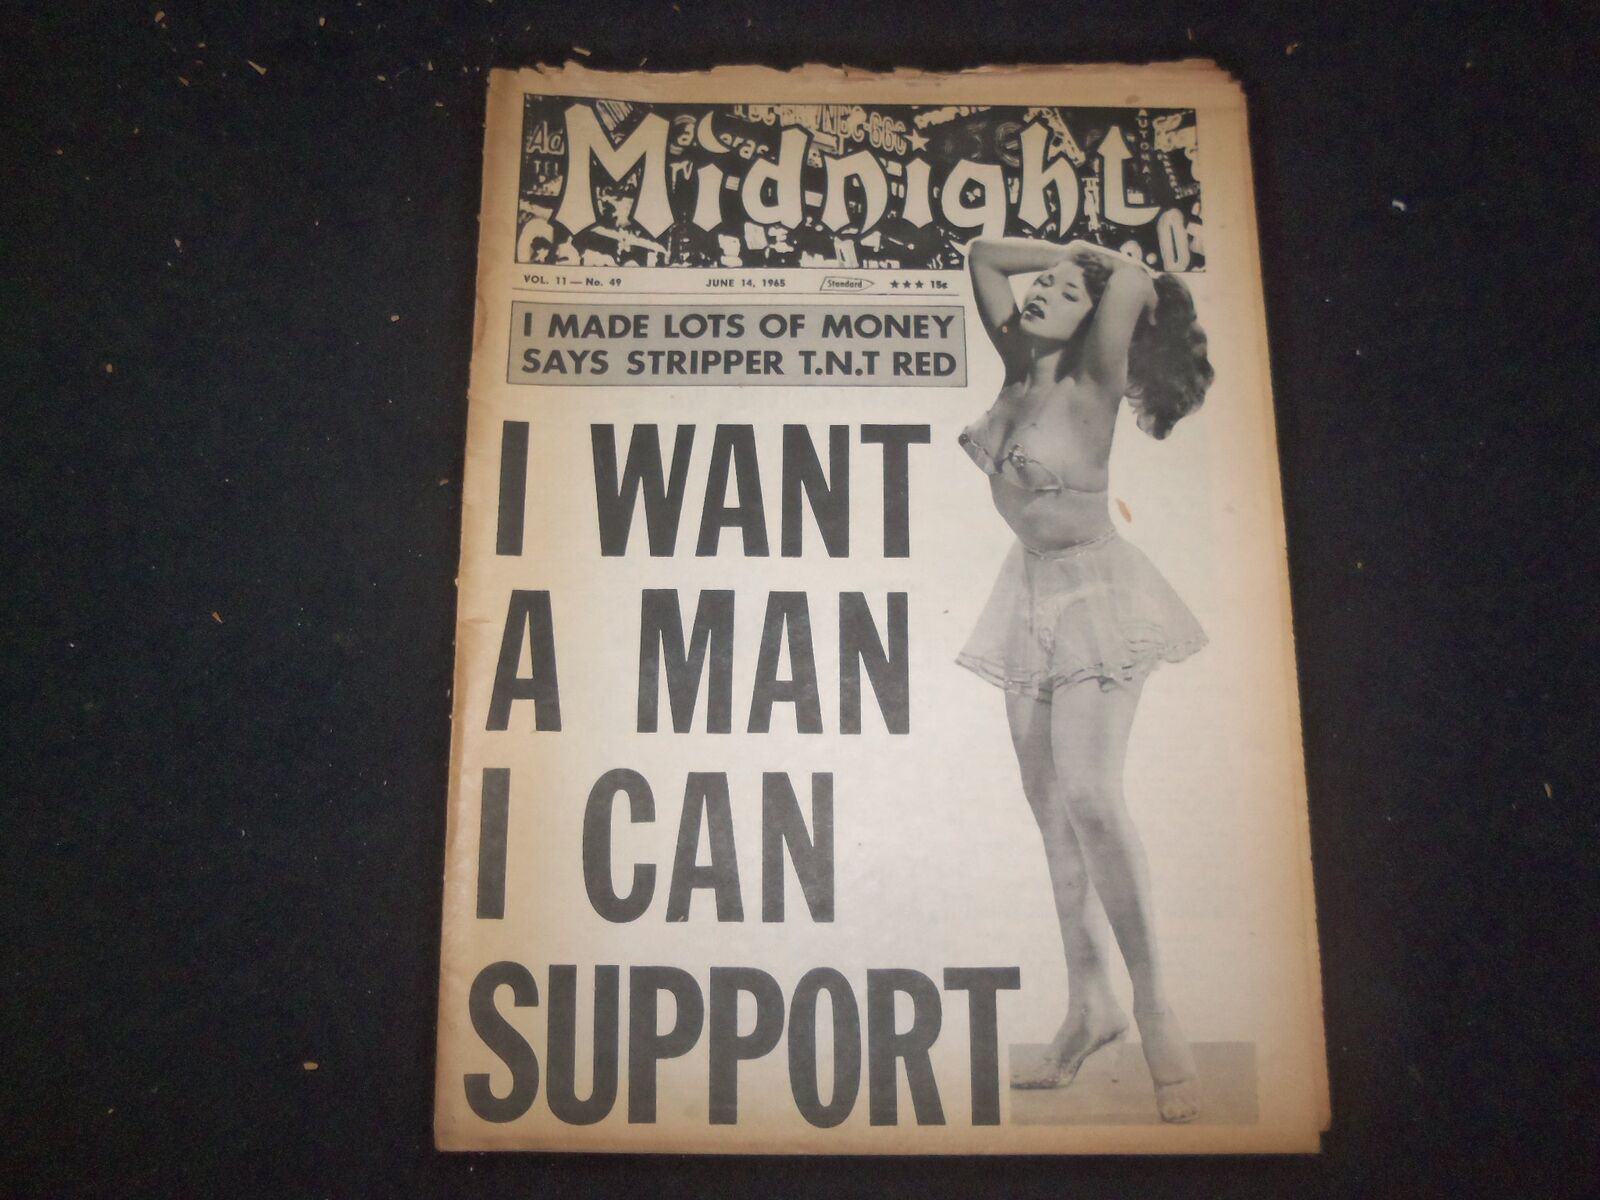 1965 JUNE 14 MIDNIGHT NEWSPAPER - I WANT A MAN I CAN SUPPORT - NP 7344